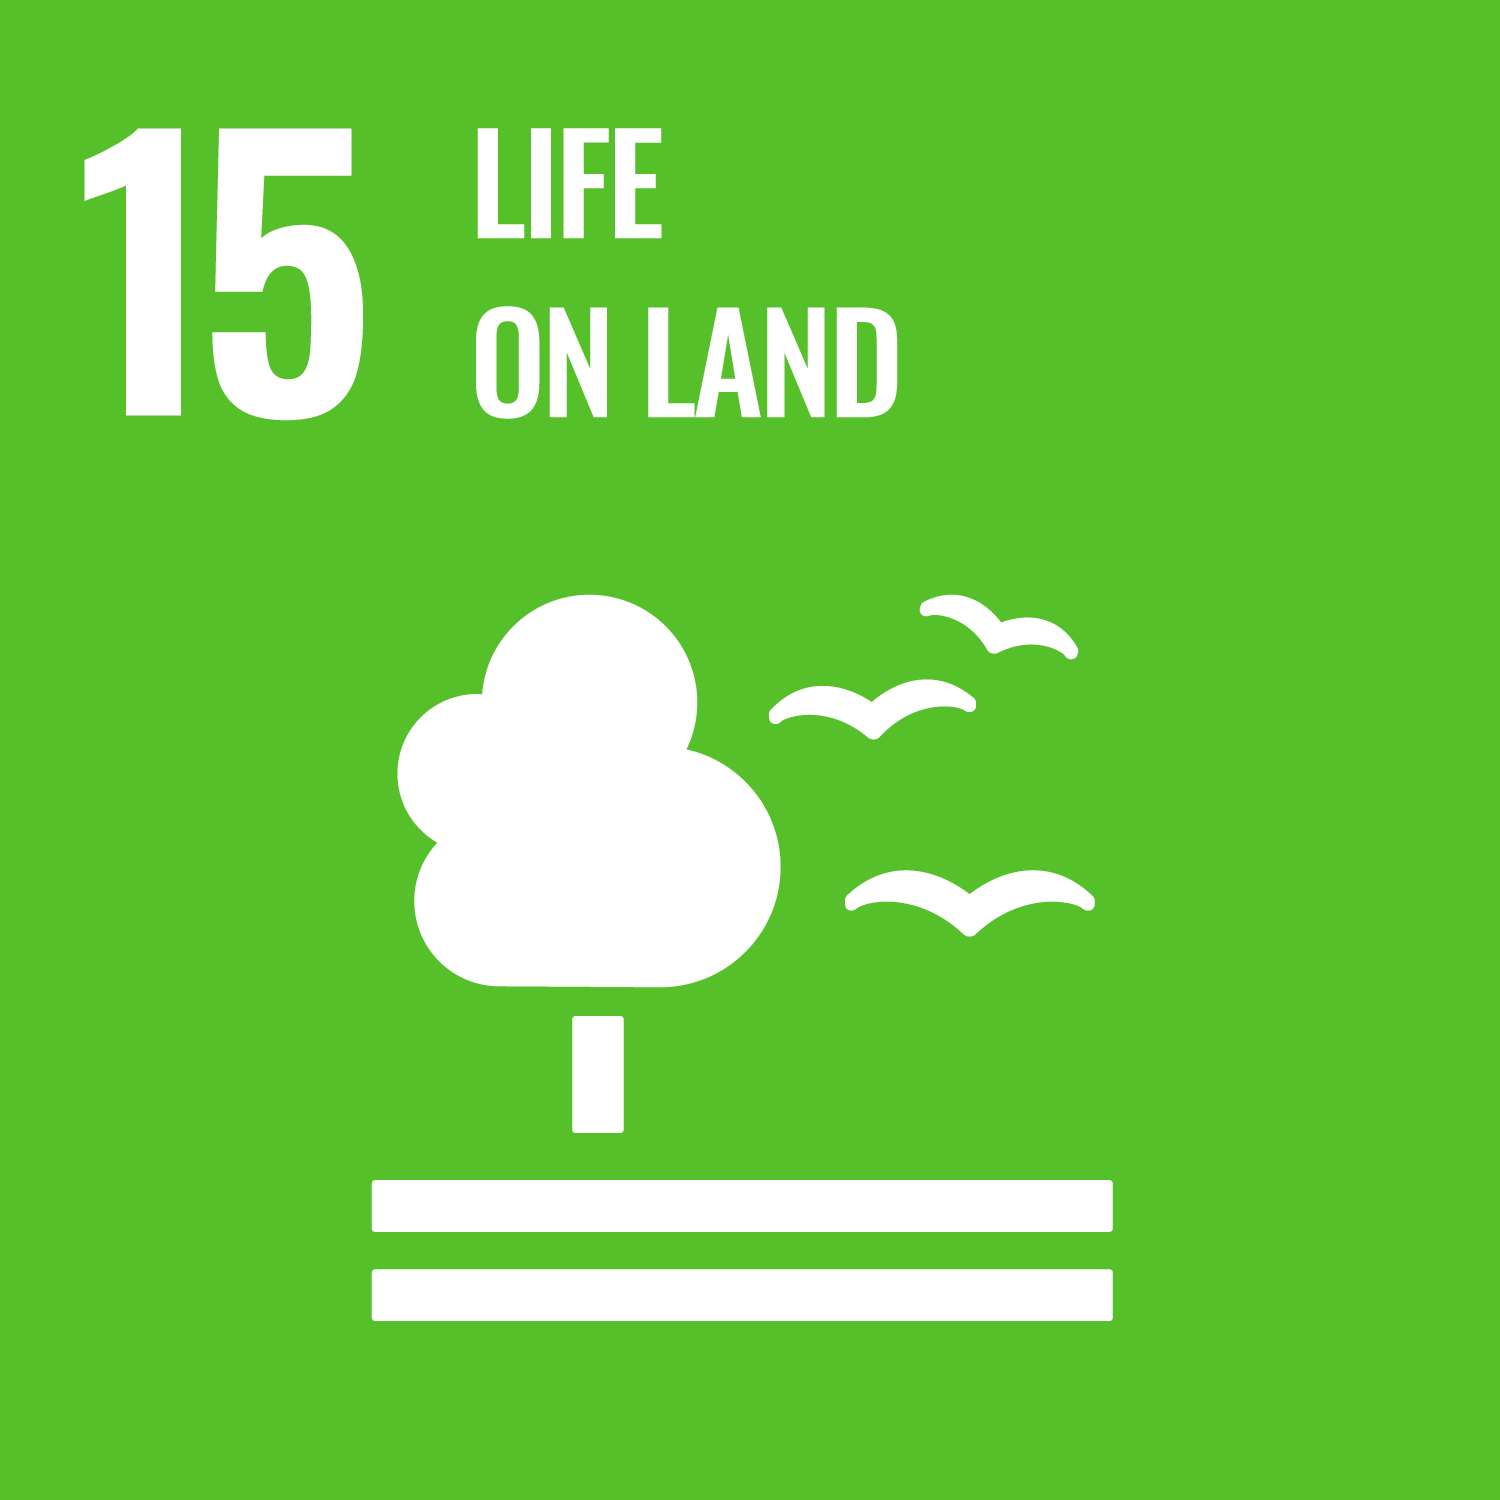 Goal Fifteen: Protect, restore and promote sustainable use of terrestrial ecosystems, sustainably manage forests, combat desertification, and halt and reverse land degradation and halt biodiversity loss